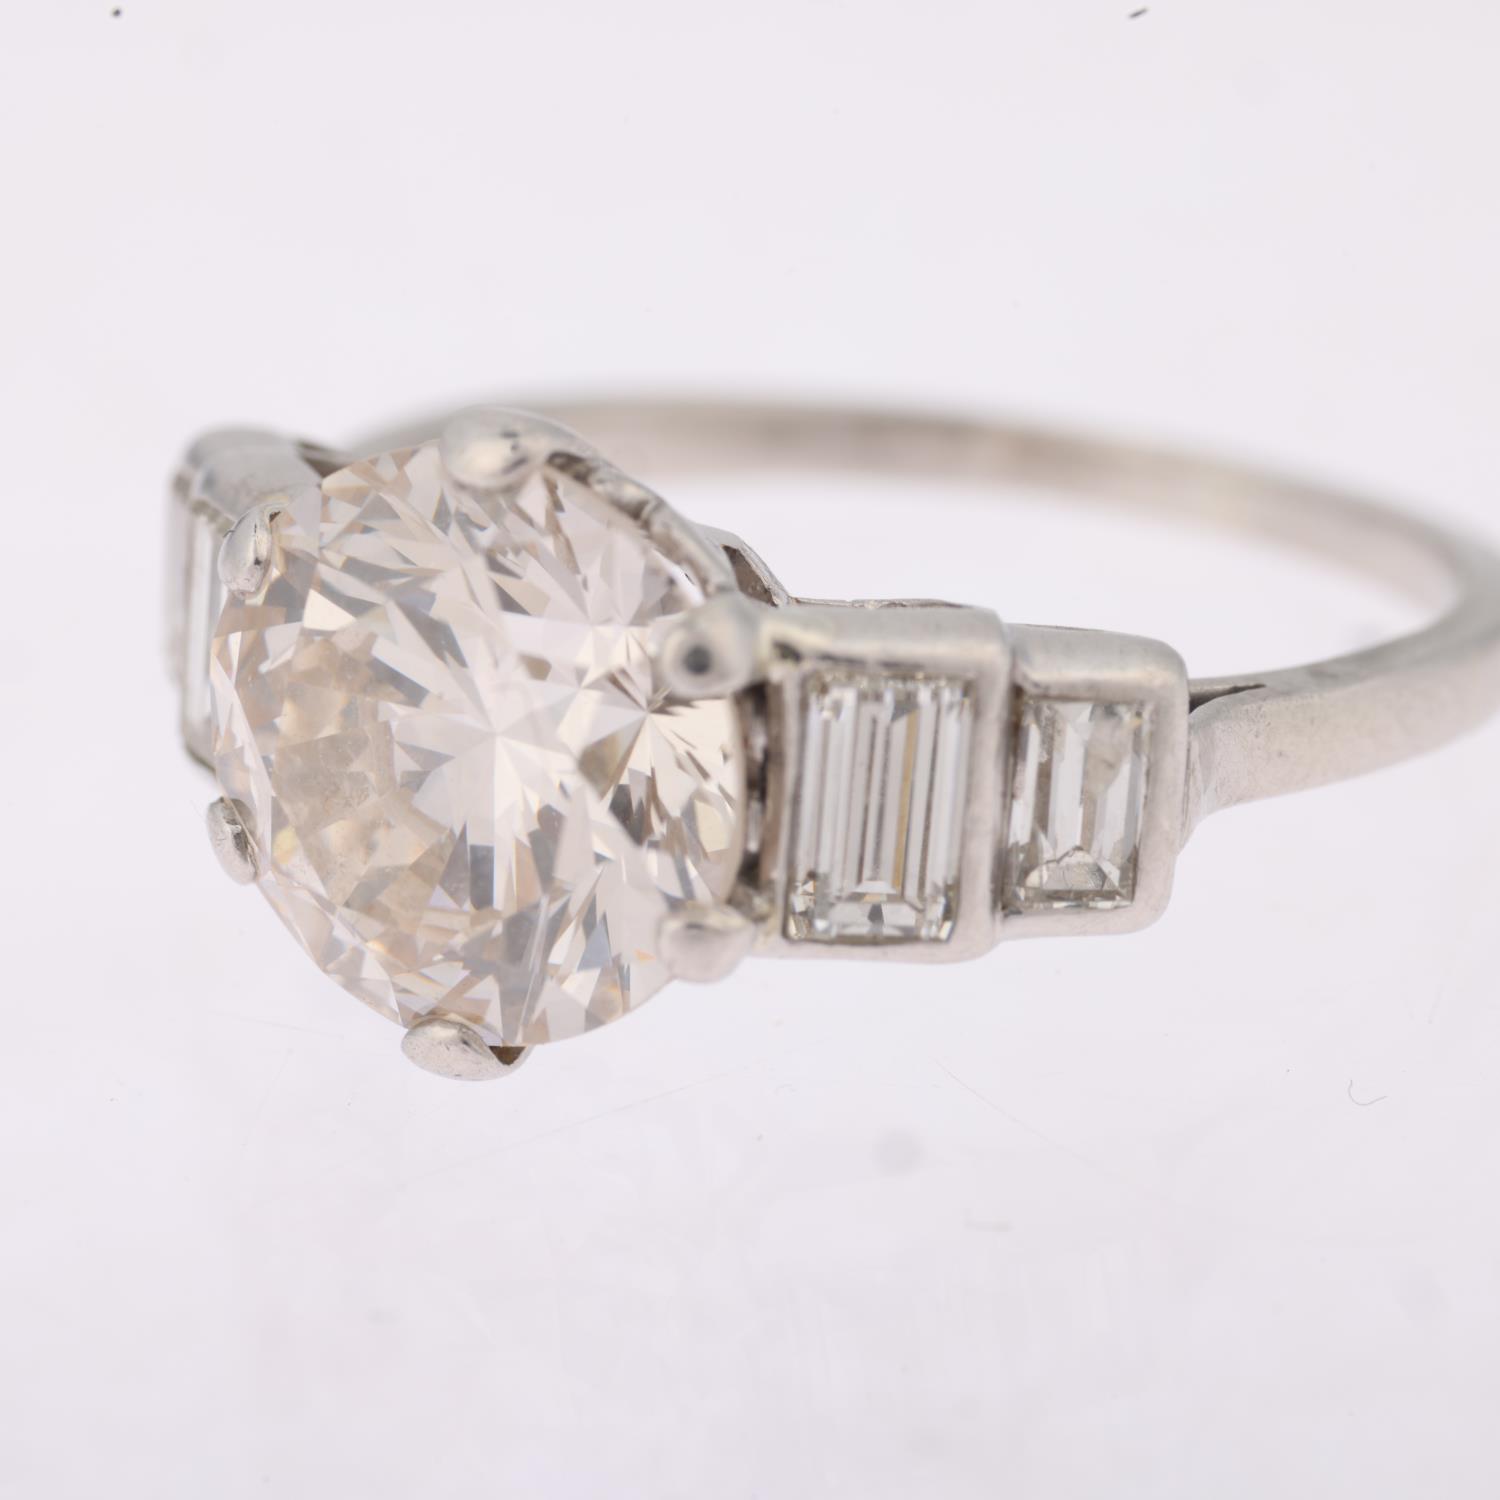 An Art Deco 2.5ct solitaire diamond ring, centrally claw set with 2.5ct round brilliant-cut diamond, - Image 3 of 4